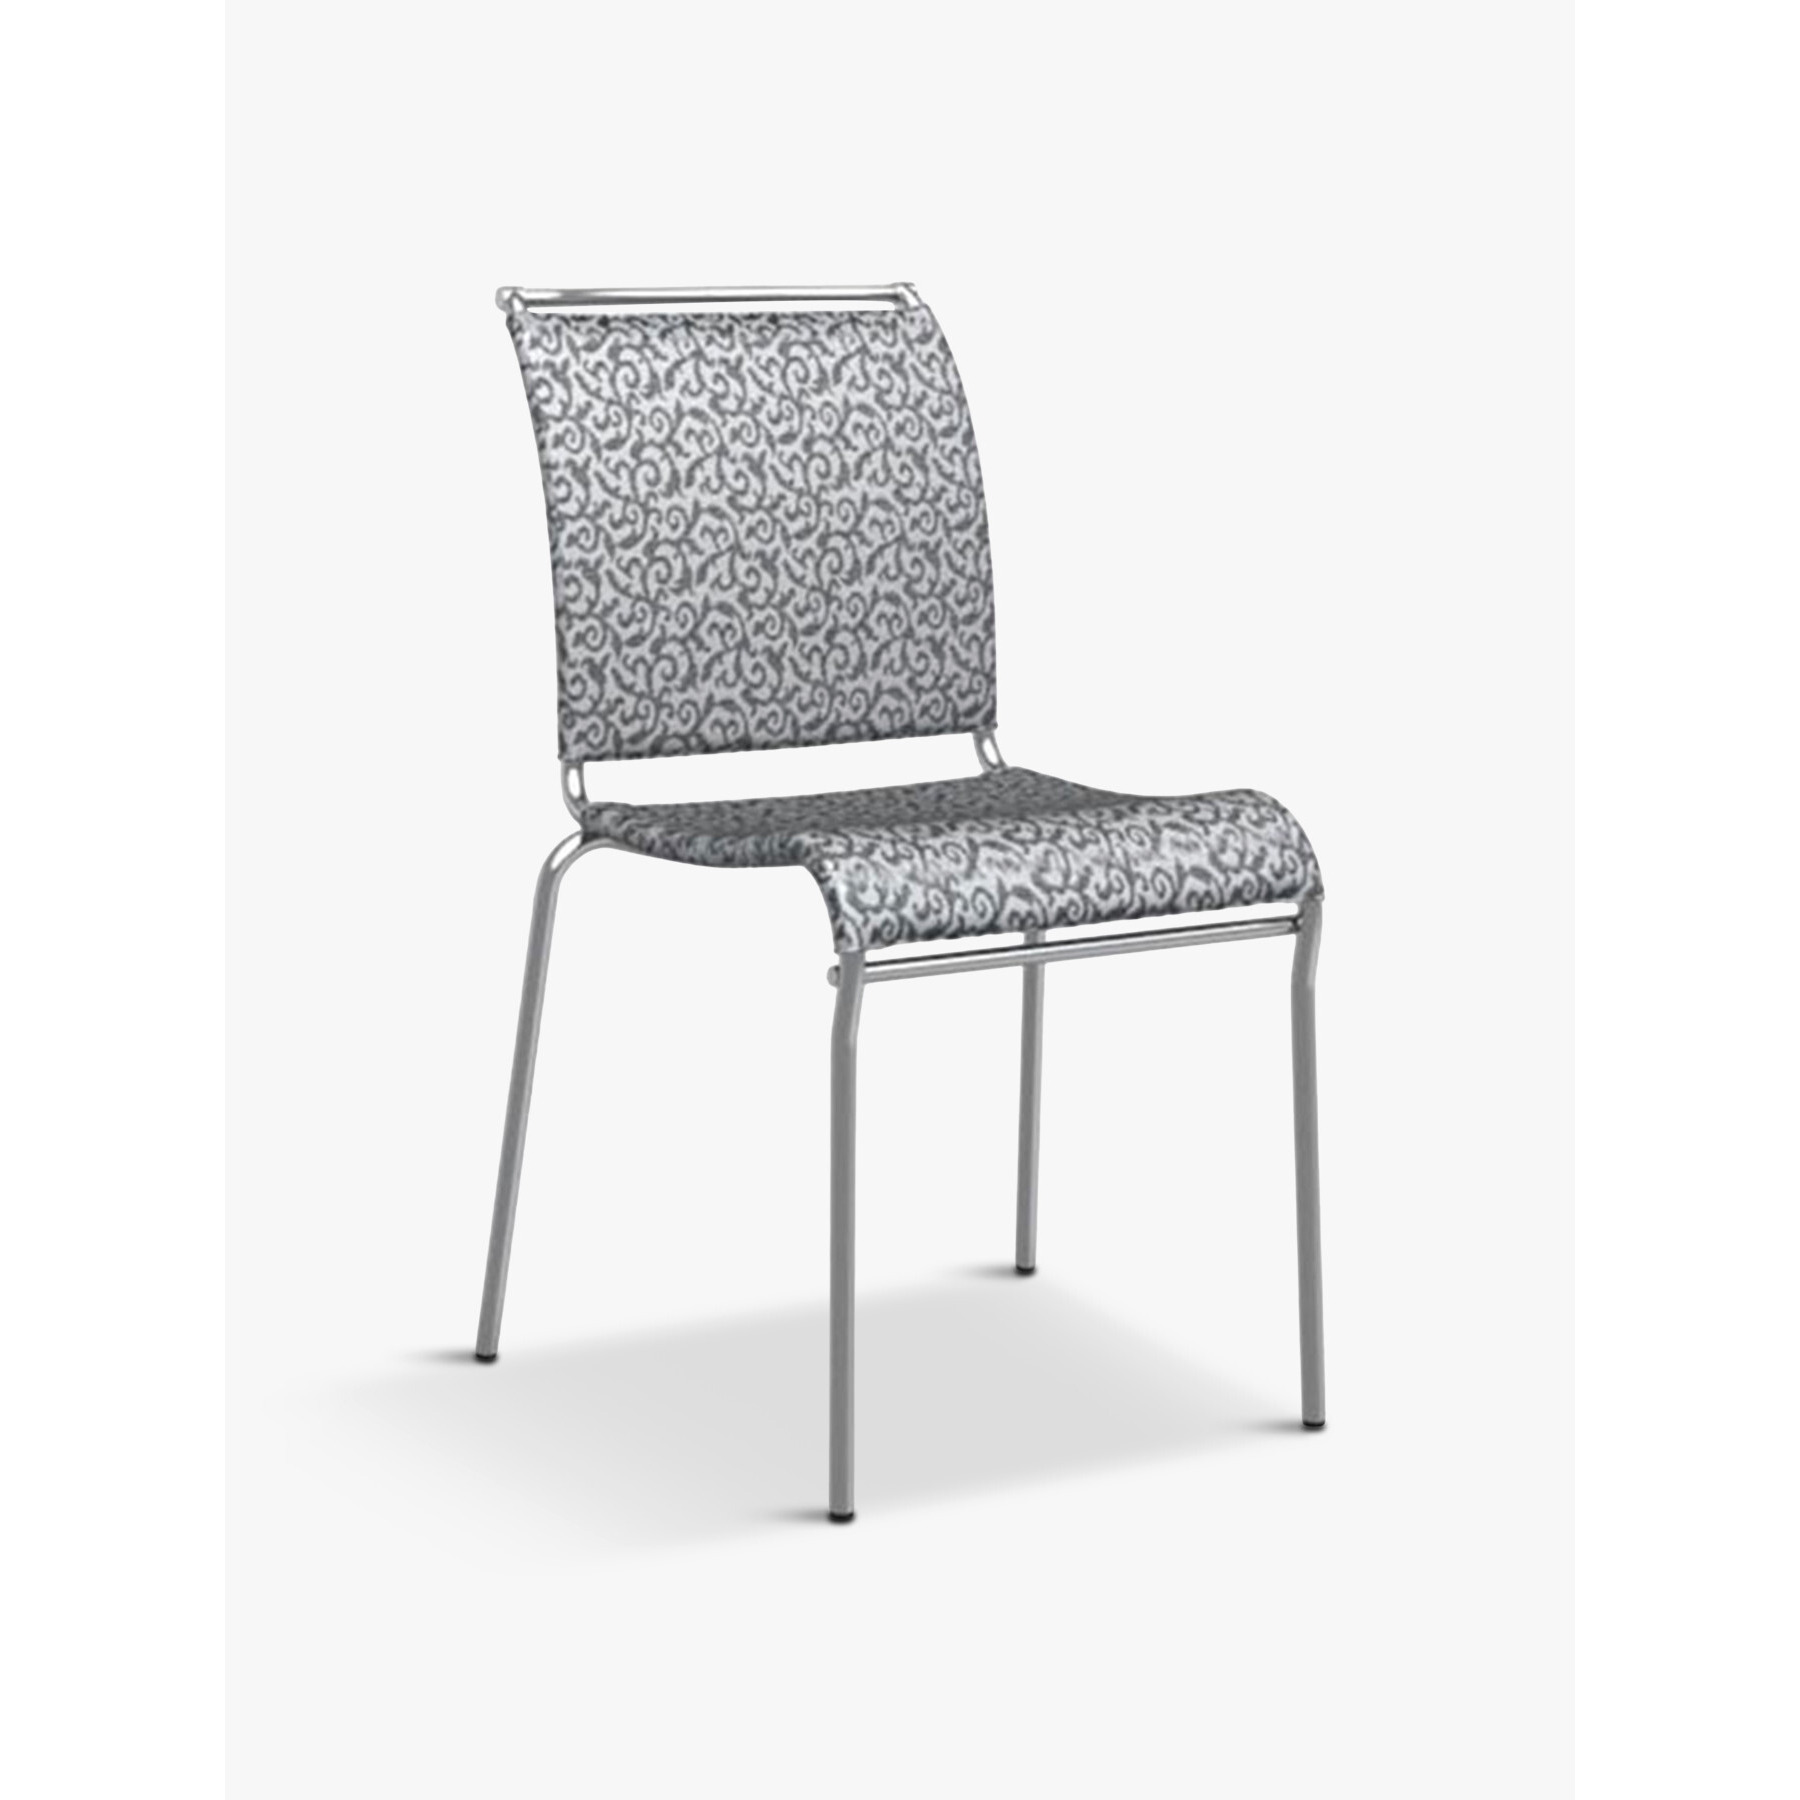 Barker and Stonehouse Benbow Patterned Dining Chair Neutral - image 1